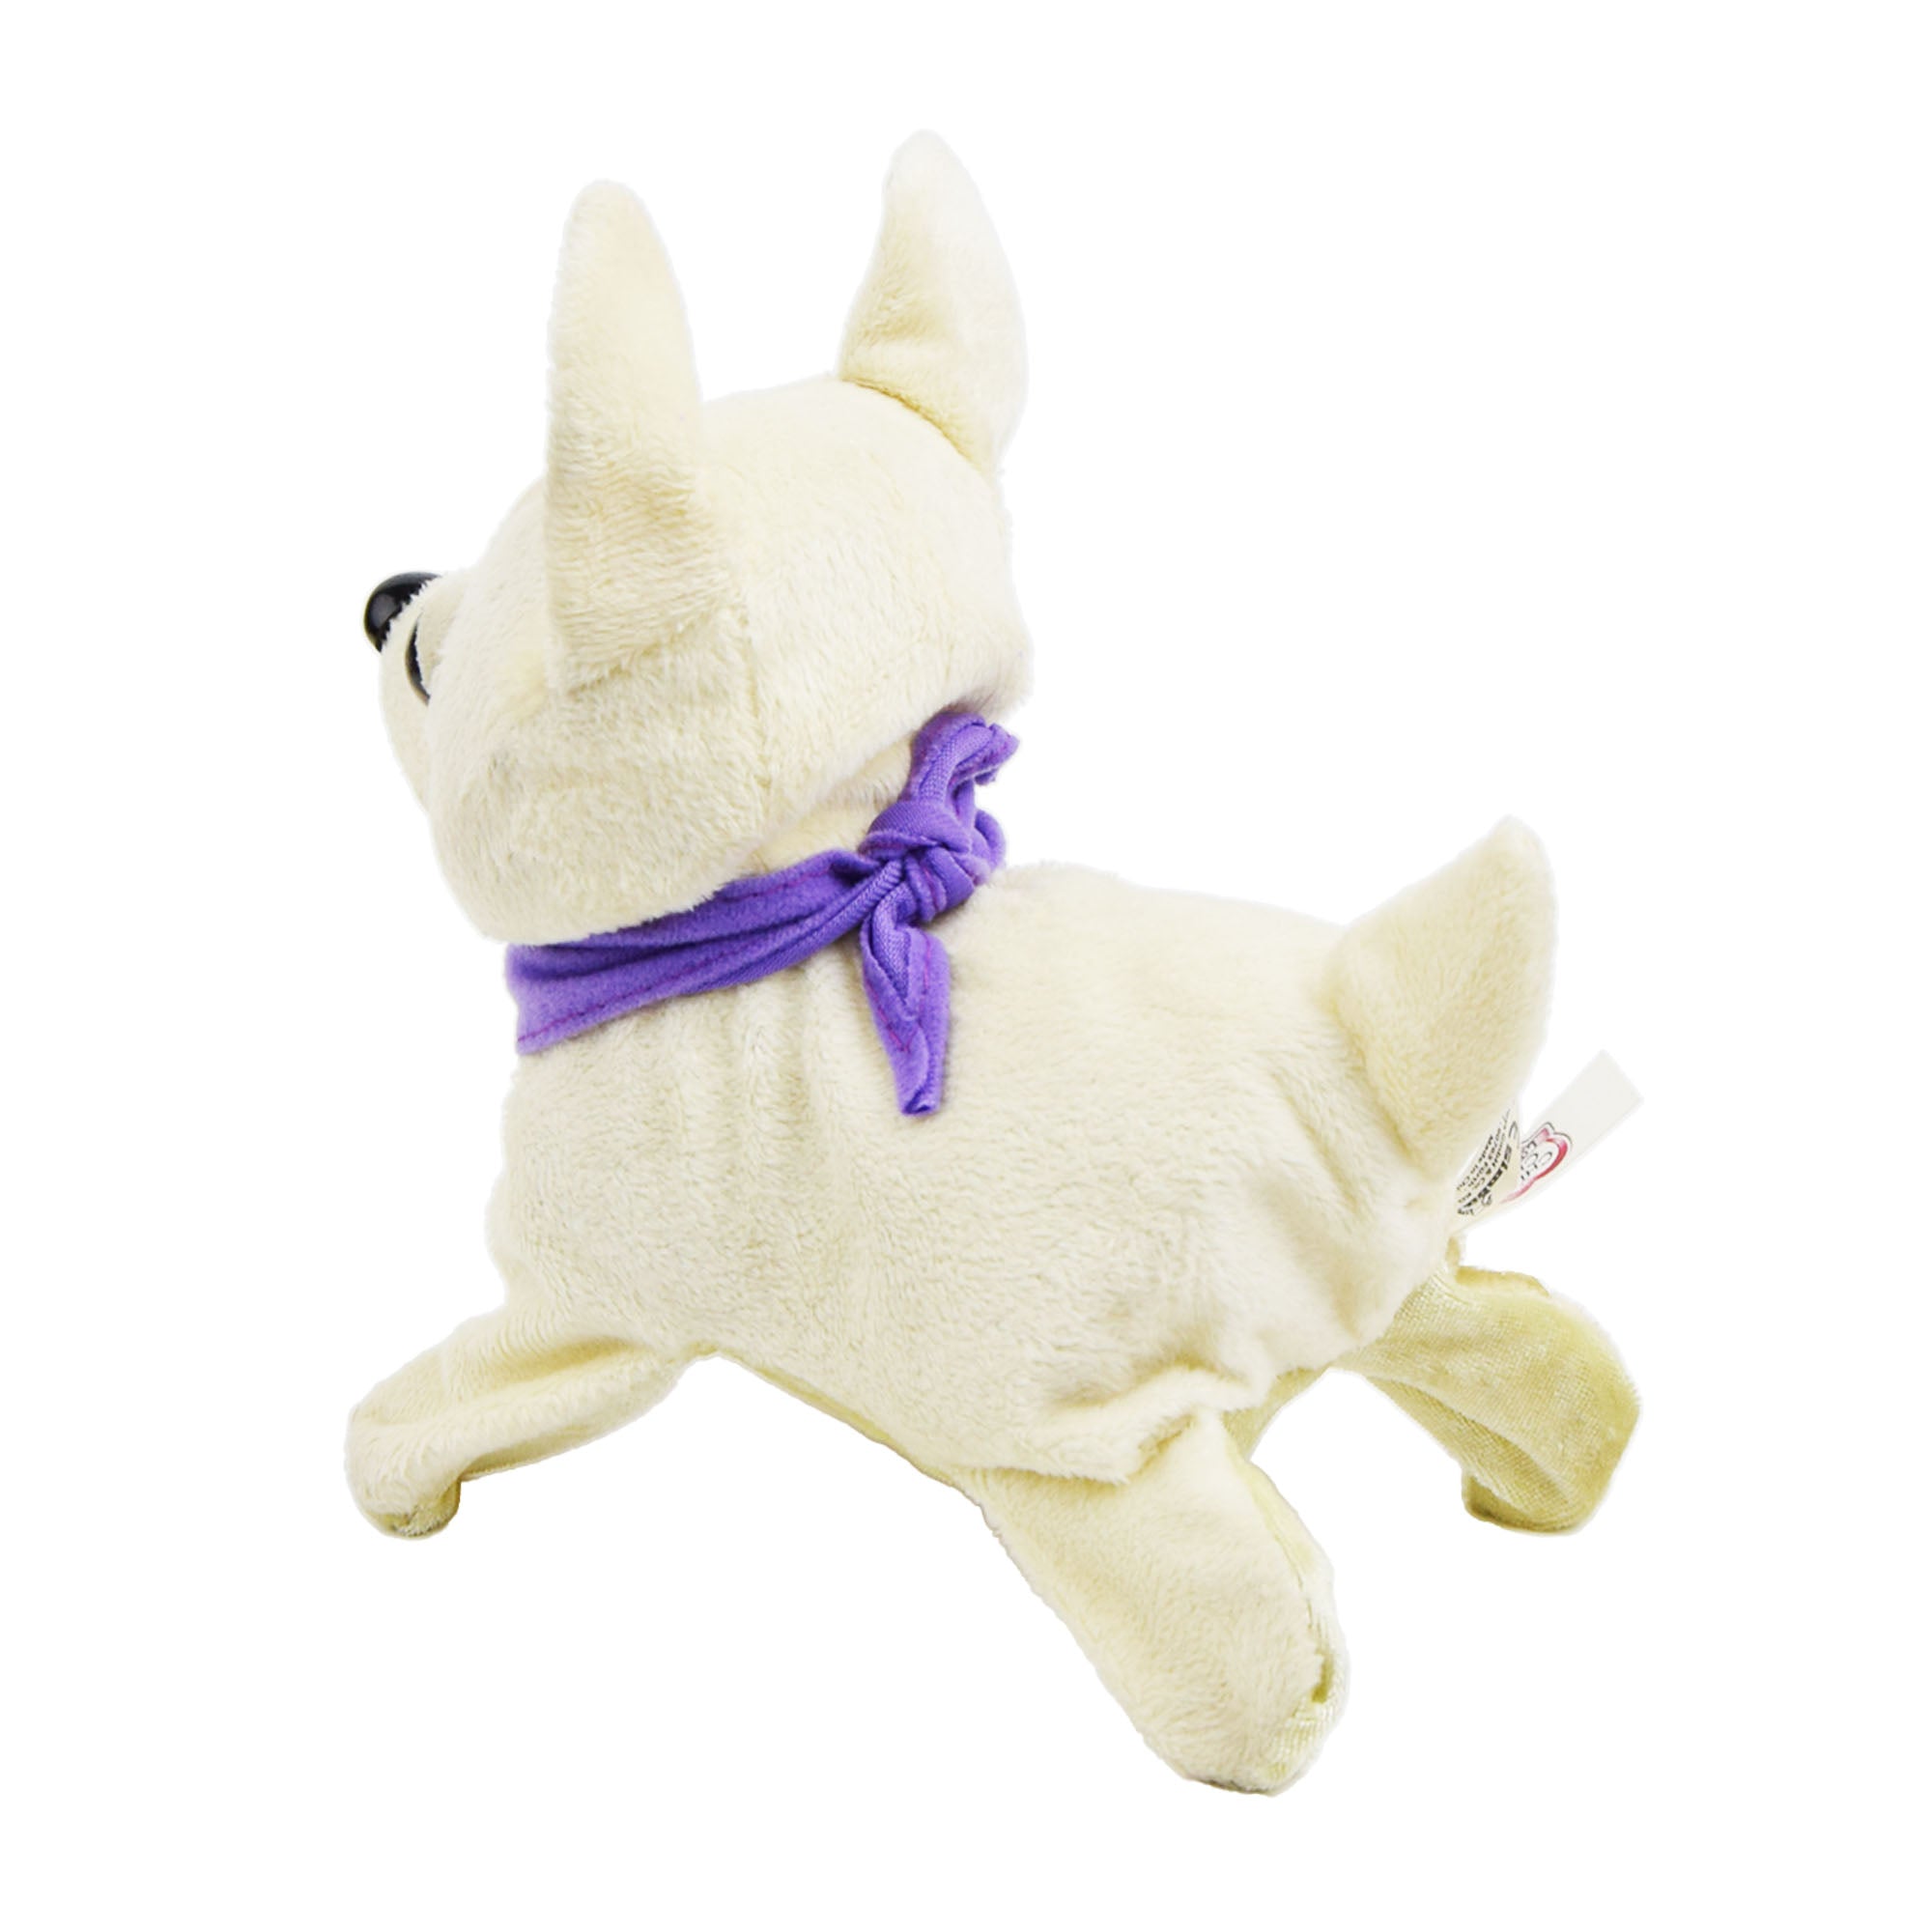 Plush Husky Dog Toy Puppy Interactive With Sound, Walk & Jump For Kids